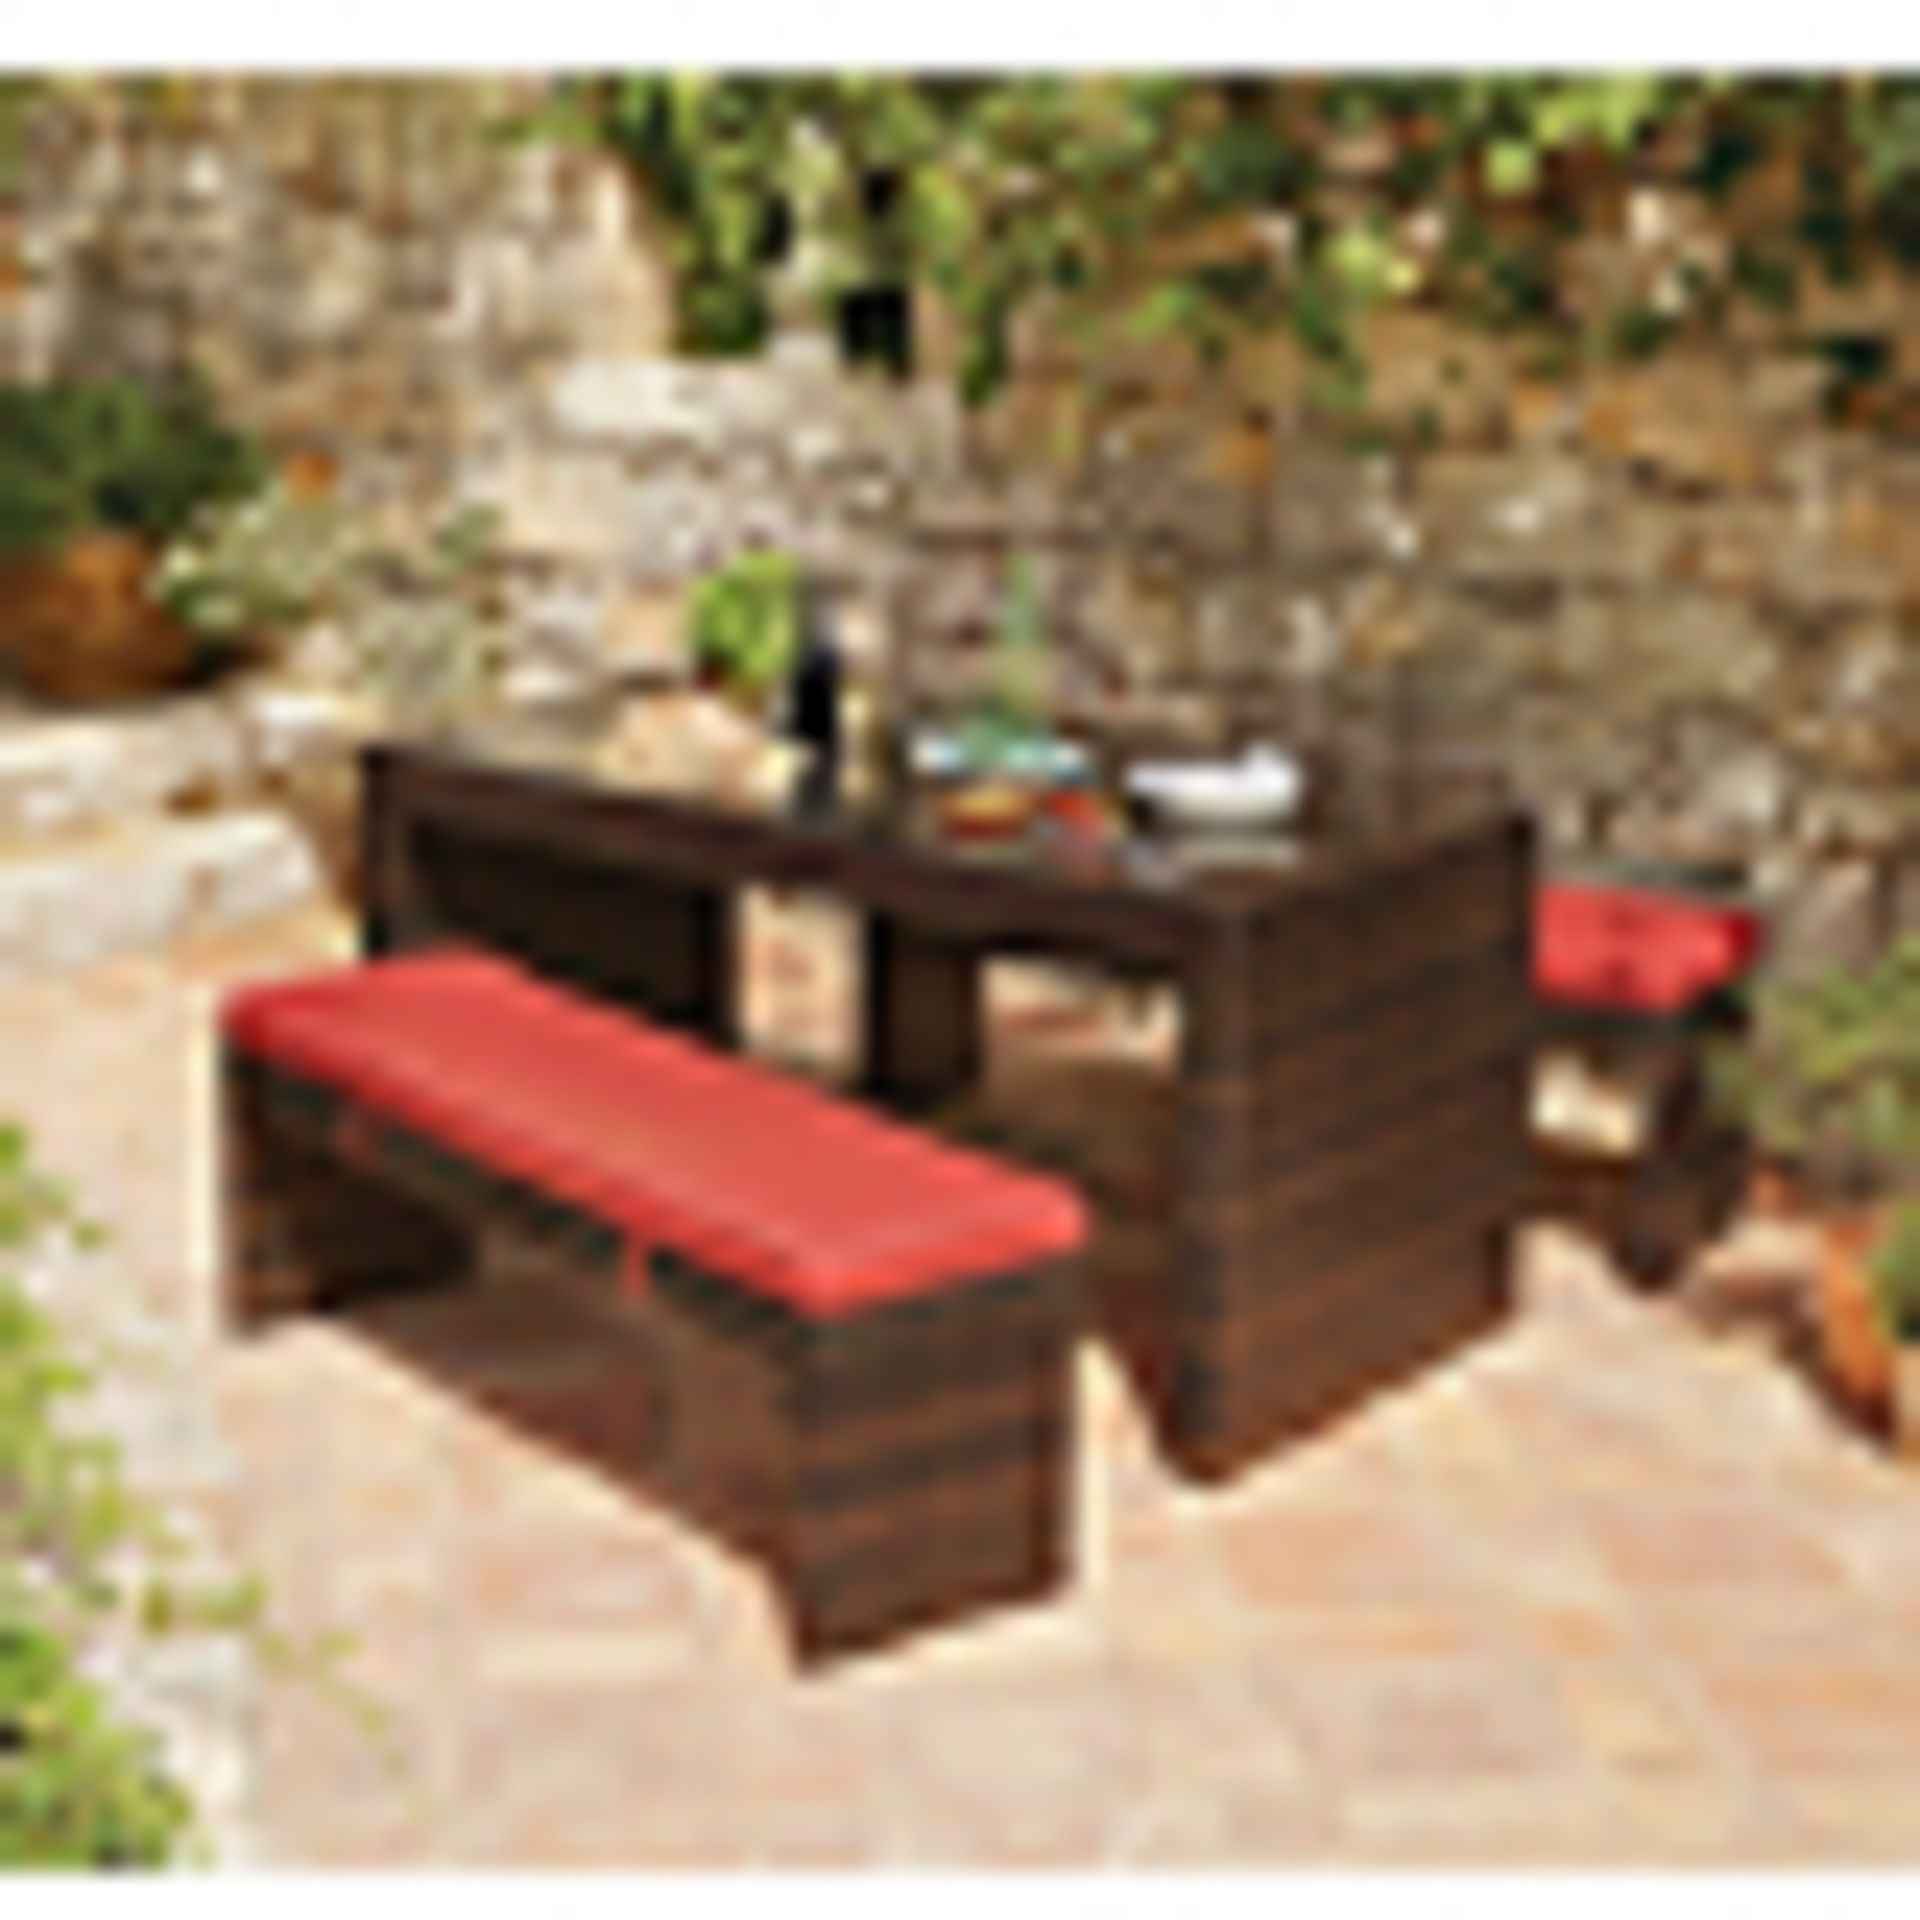 Jakarta 3pc deluxe bench dining set, red colour. New and boxed. See picture for design. RRP £329. - Image 2 of 7